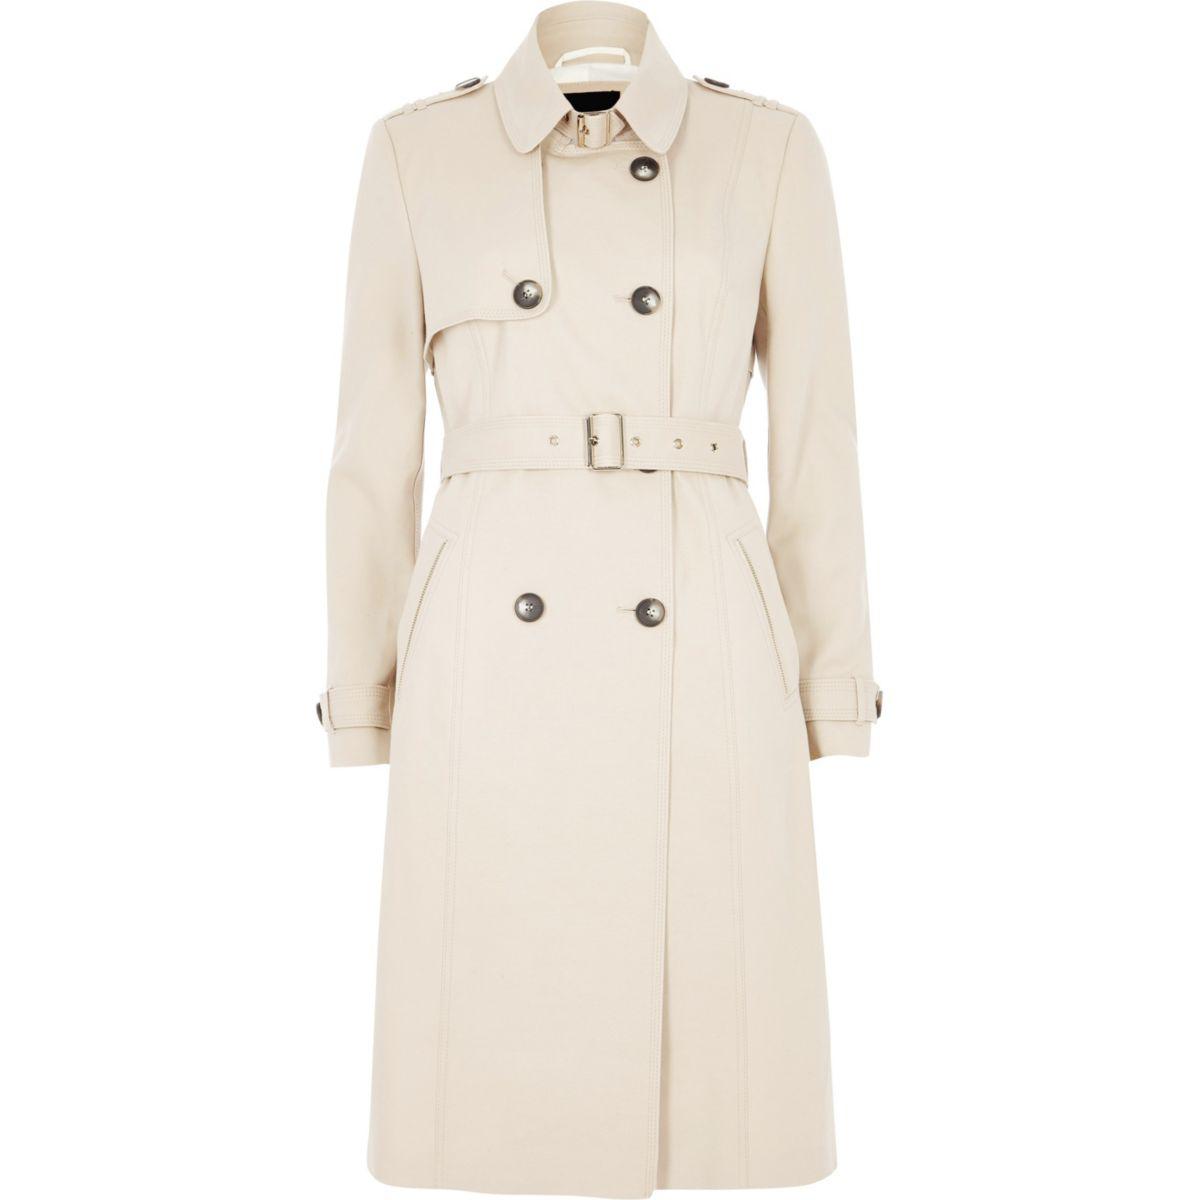 River Island Cream Belted Trench Coat Cream Belted Trench Coat in ...